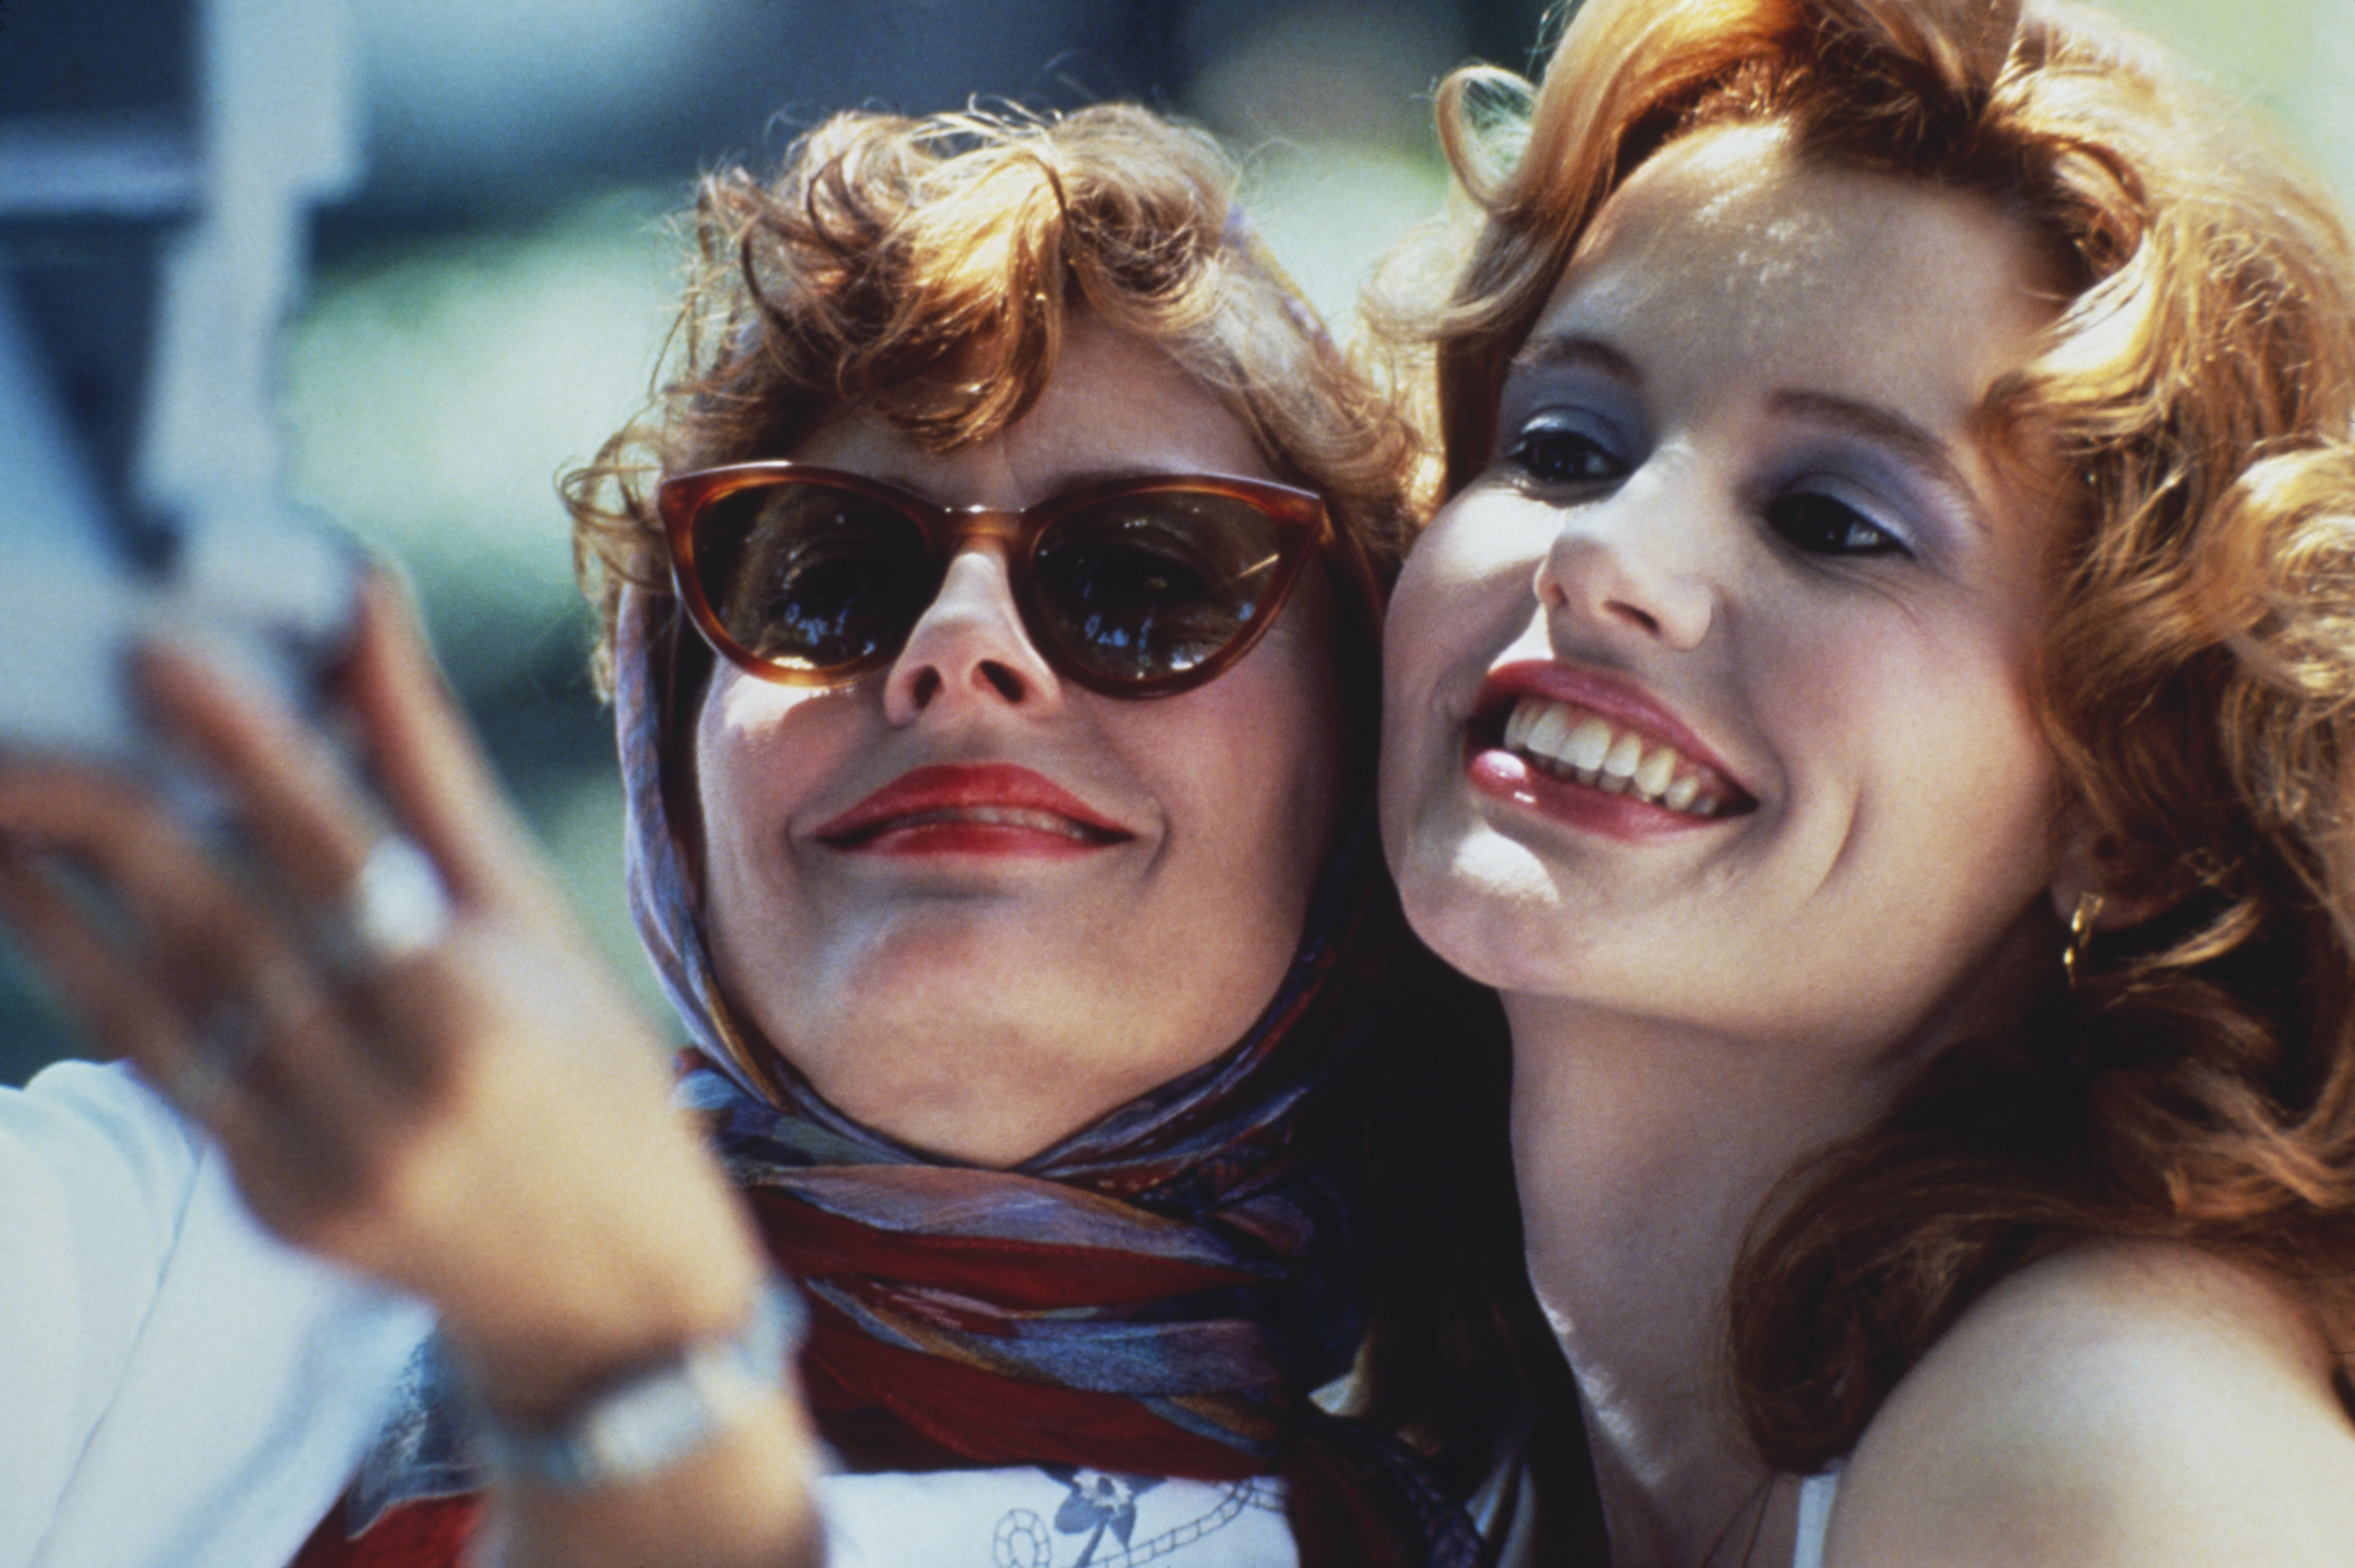 Susan Sarandon and Geena Davis as Louise and Thelma in "Thelma & Louise" in 1991 | Source: Getty Images